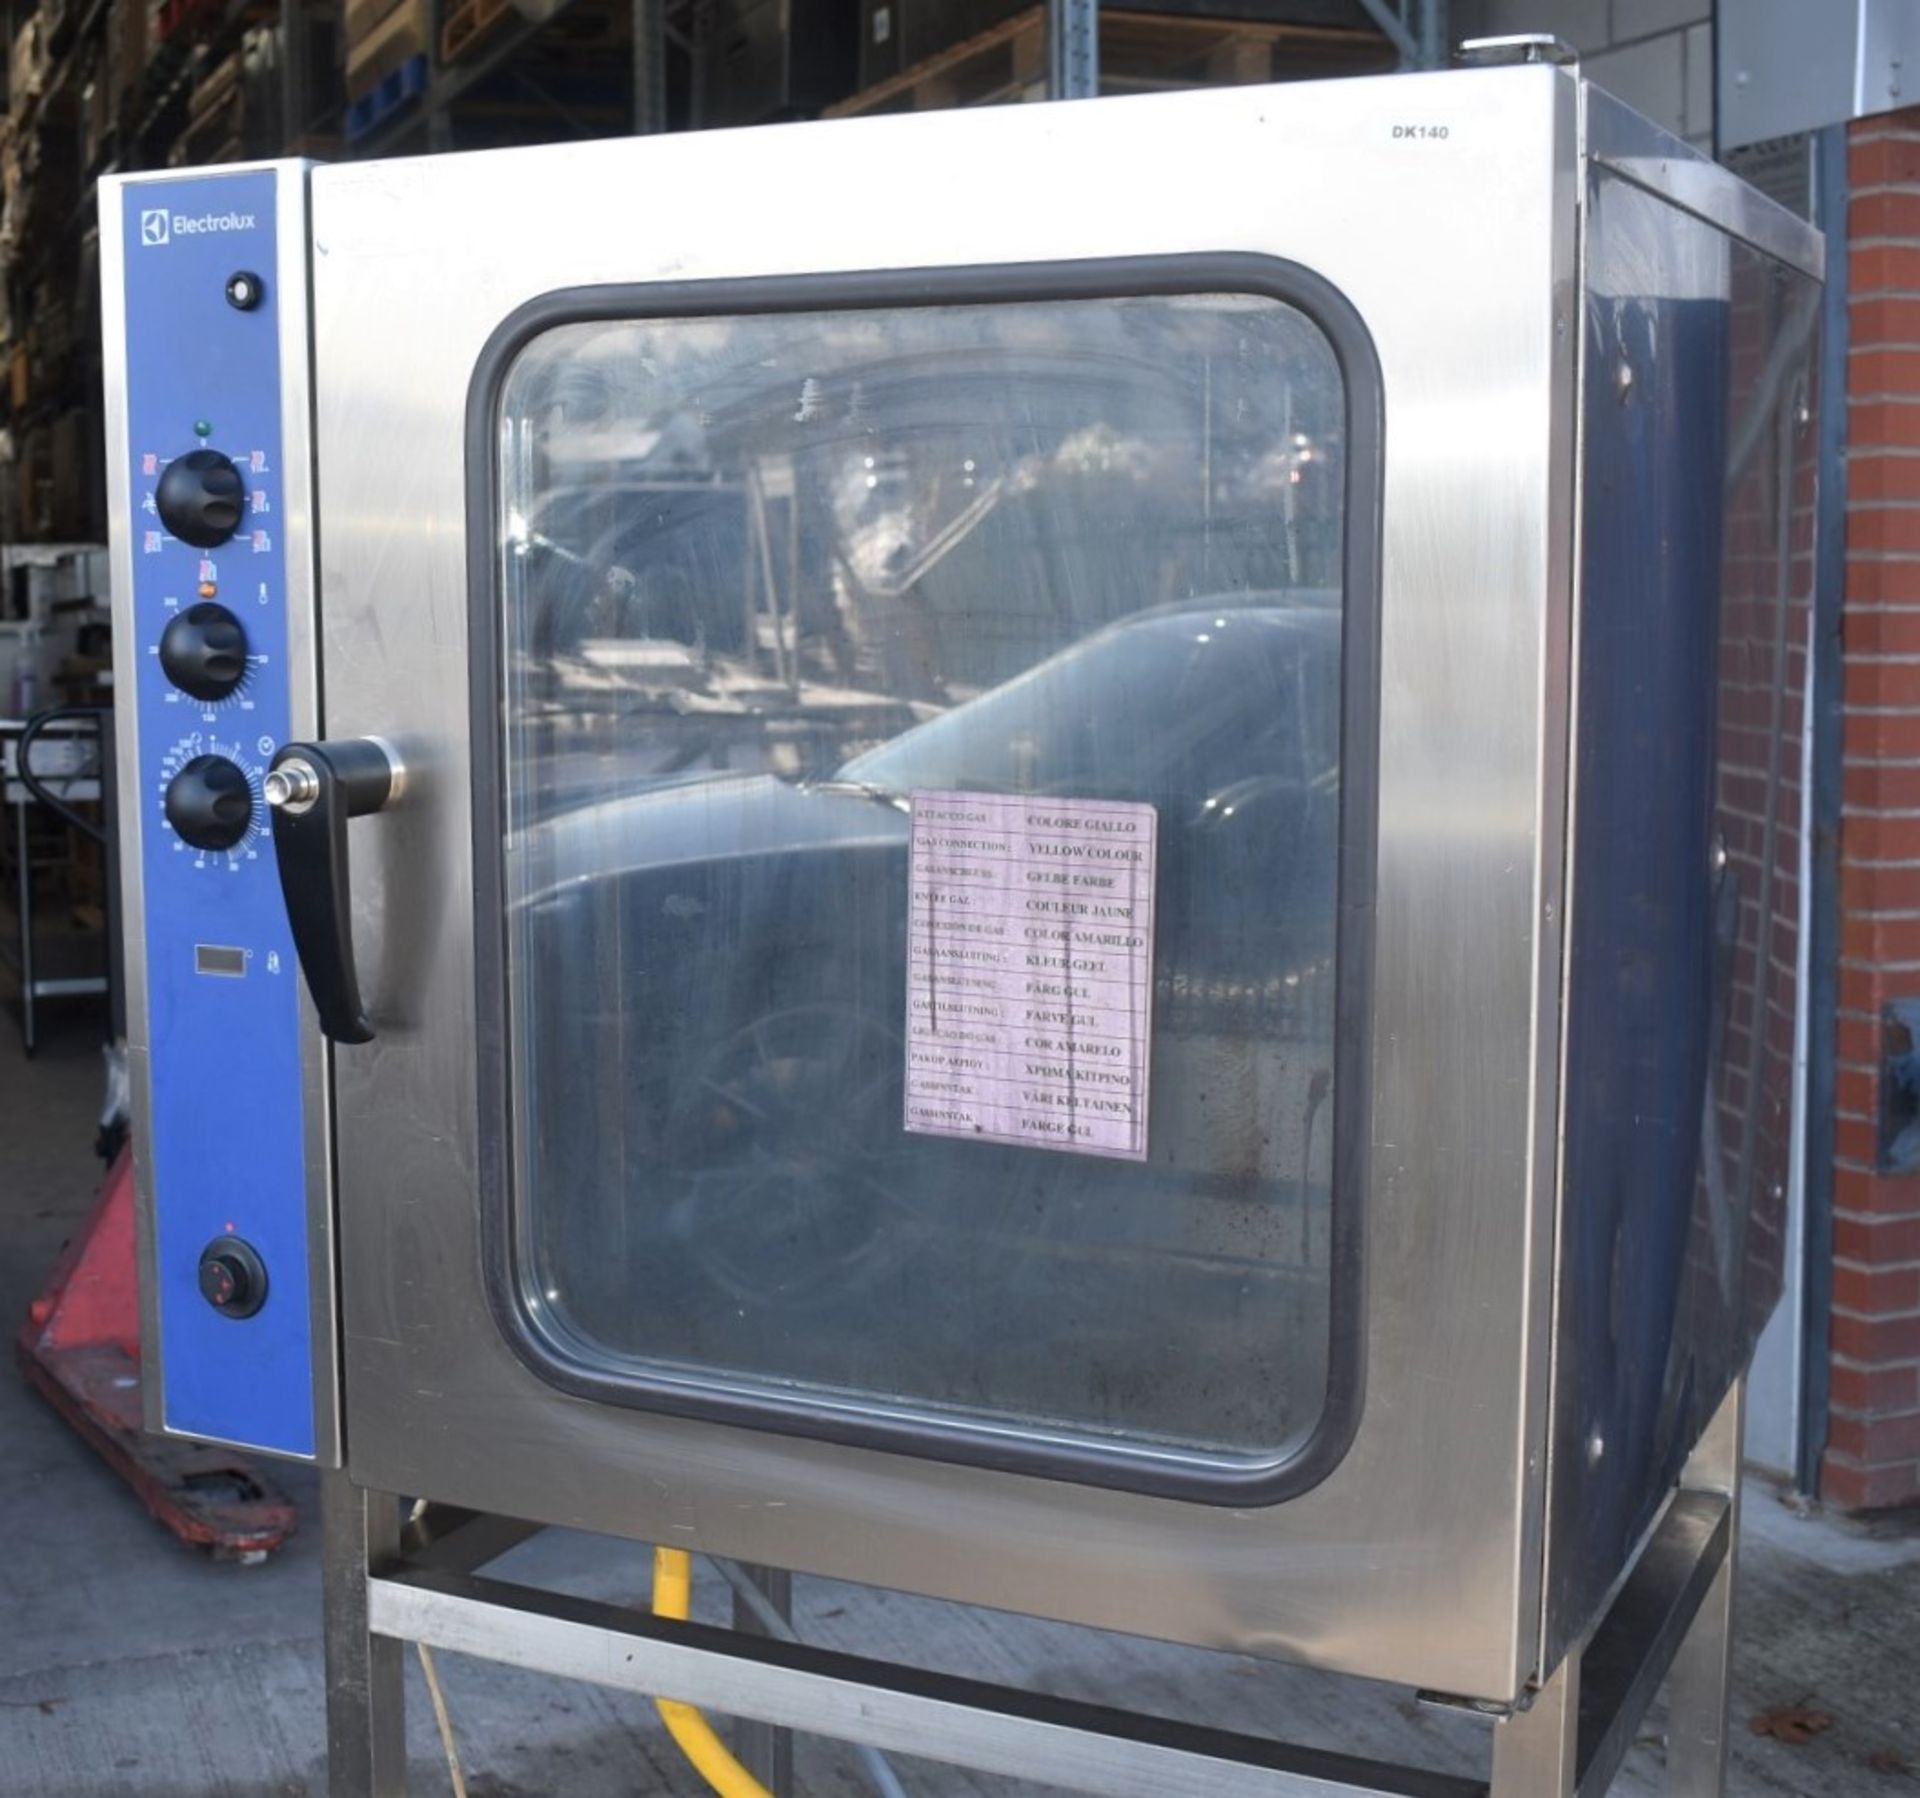 1 x Electrolux 10 Grid Convection Oven With Stand - 2020 Model - Type: ECFG101-0 - RRP £6,500 - Image 3 of 13